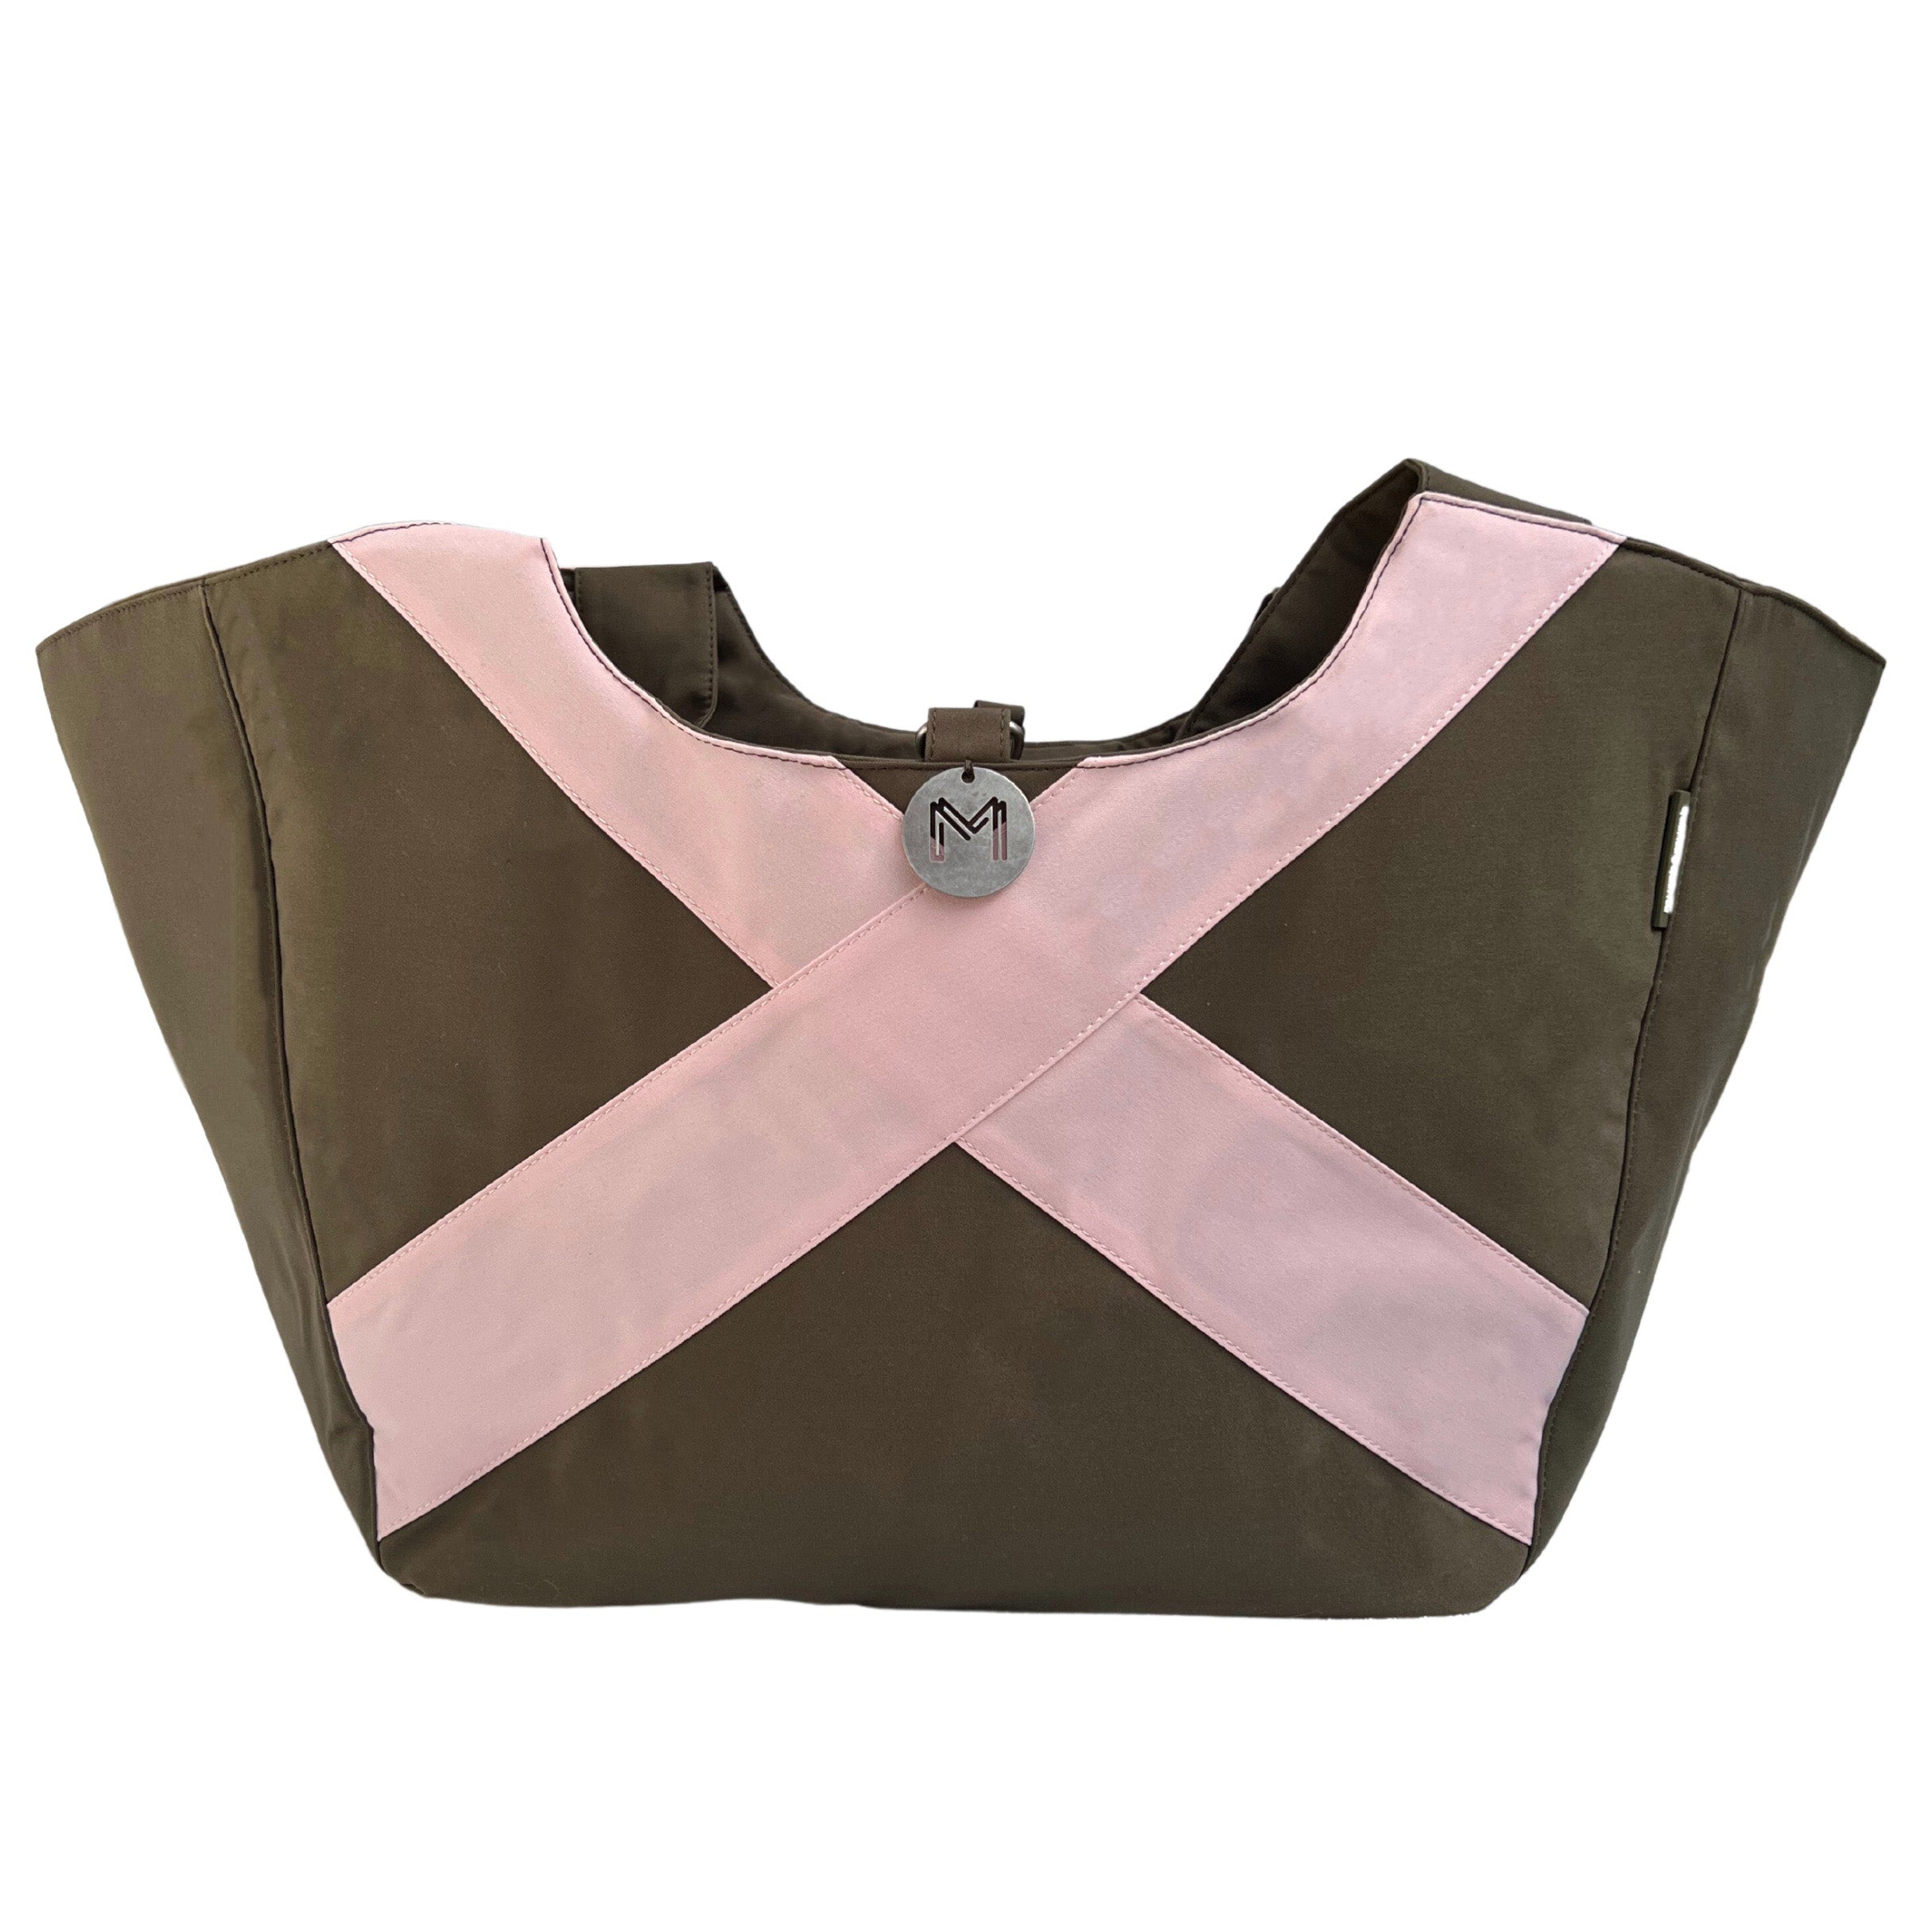 Cove Carry-All - Khaki with Pastel Pink Cross (LIMITED EDITION)